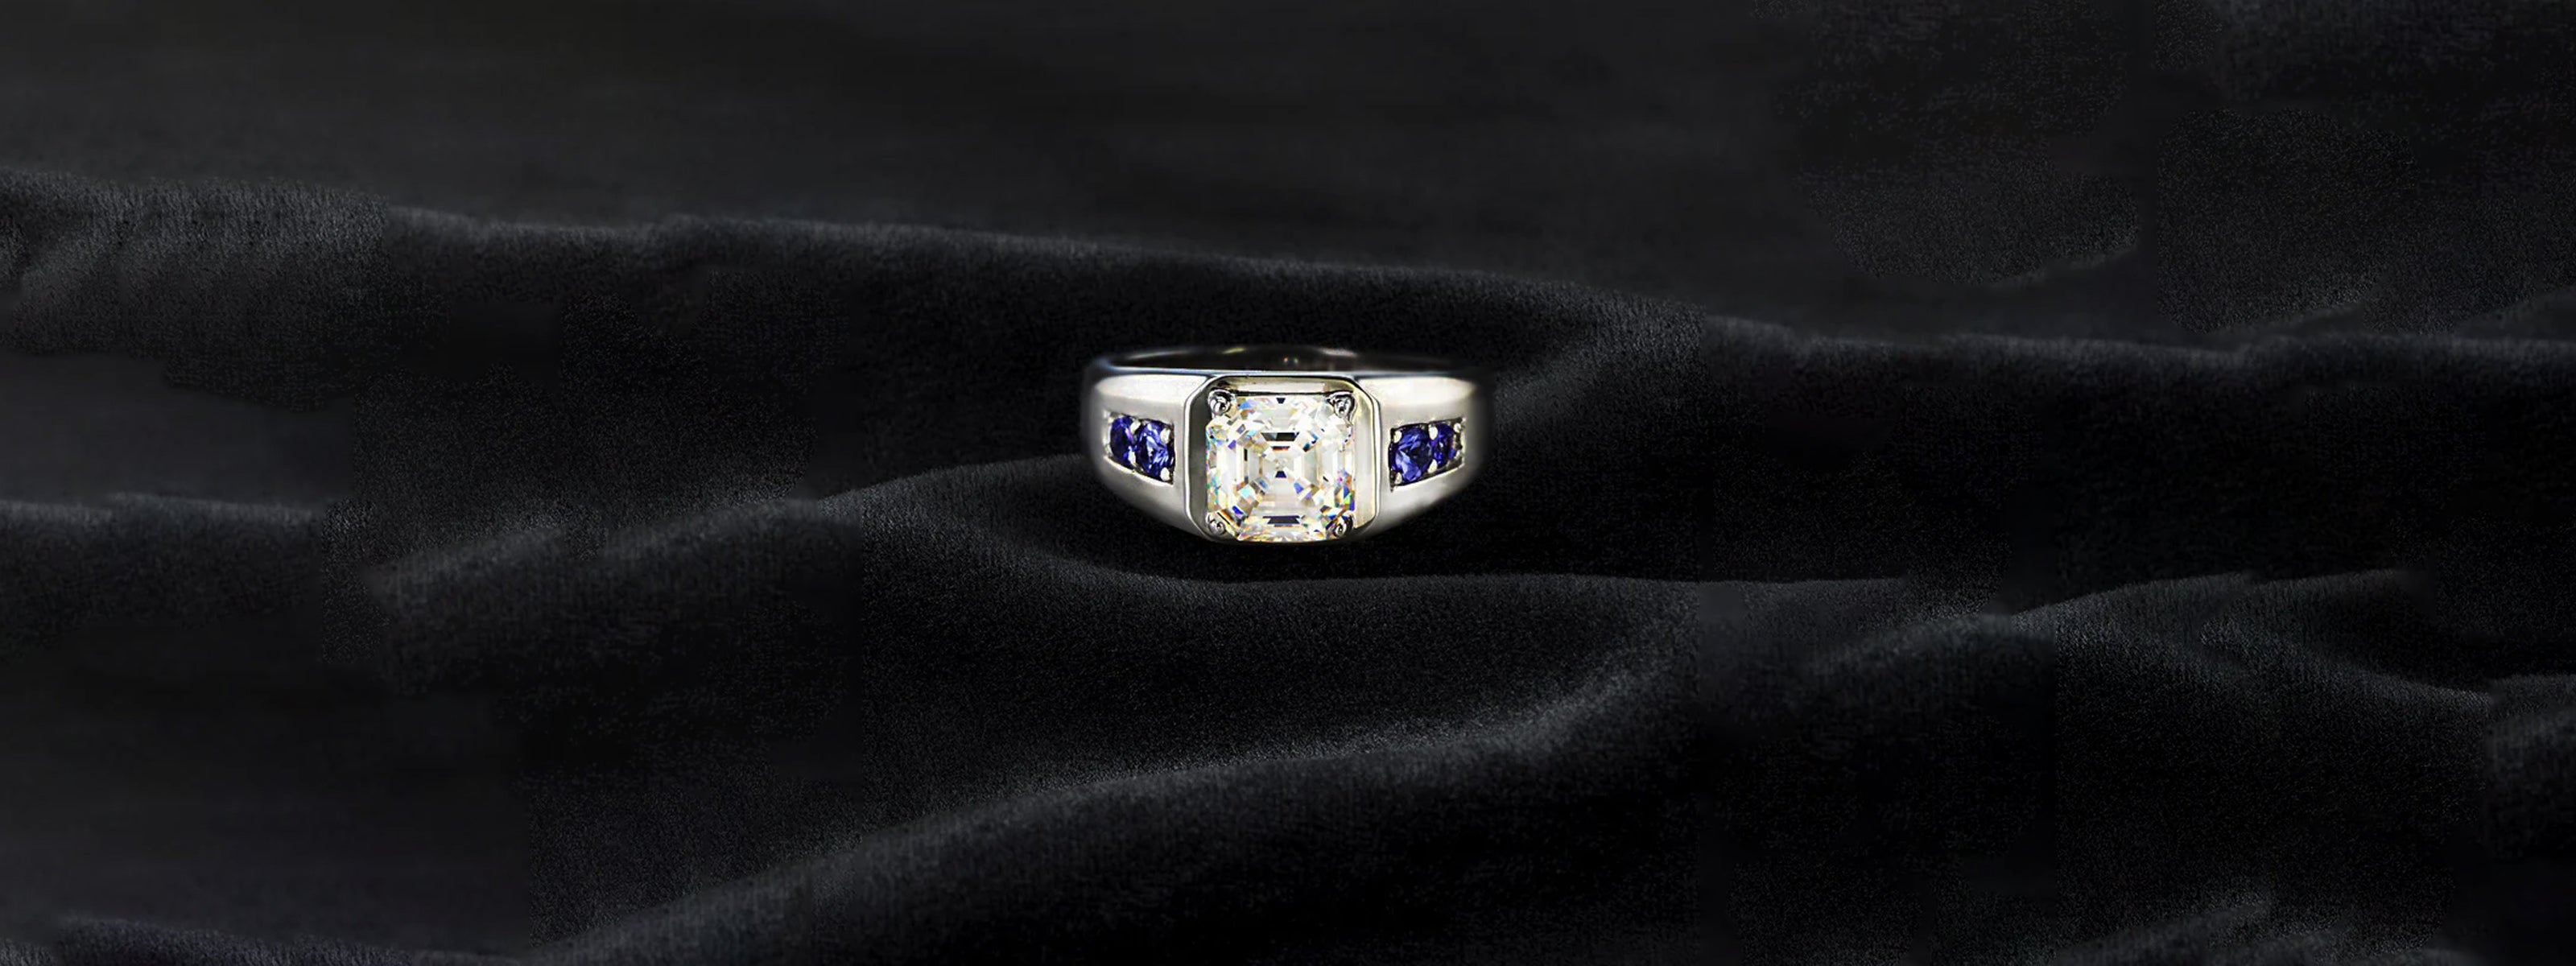 Why choose a sapphire ring?